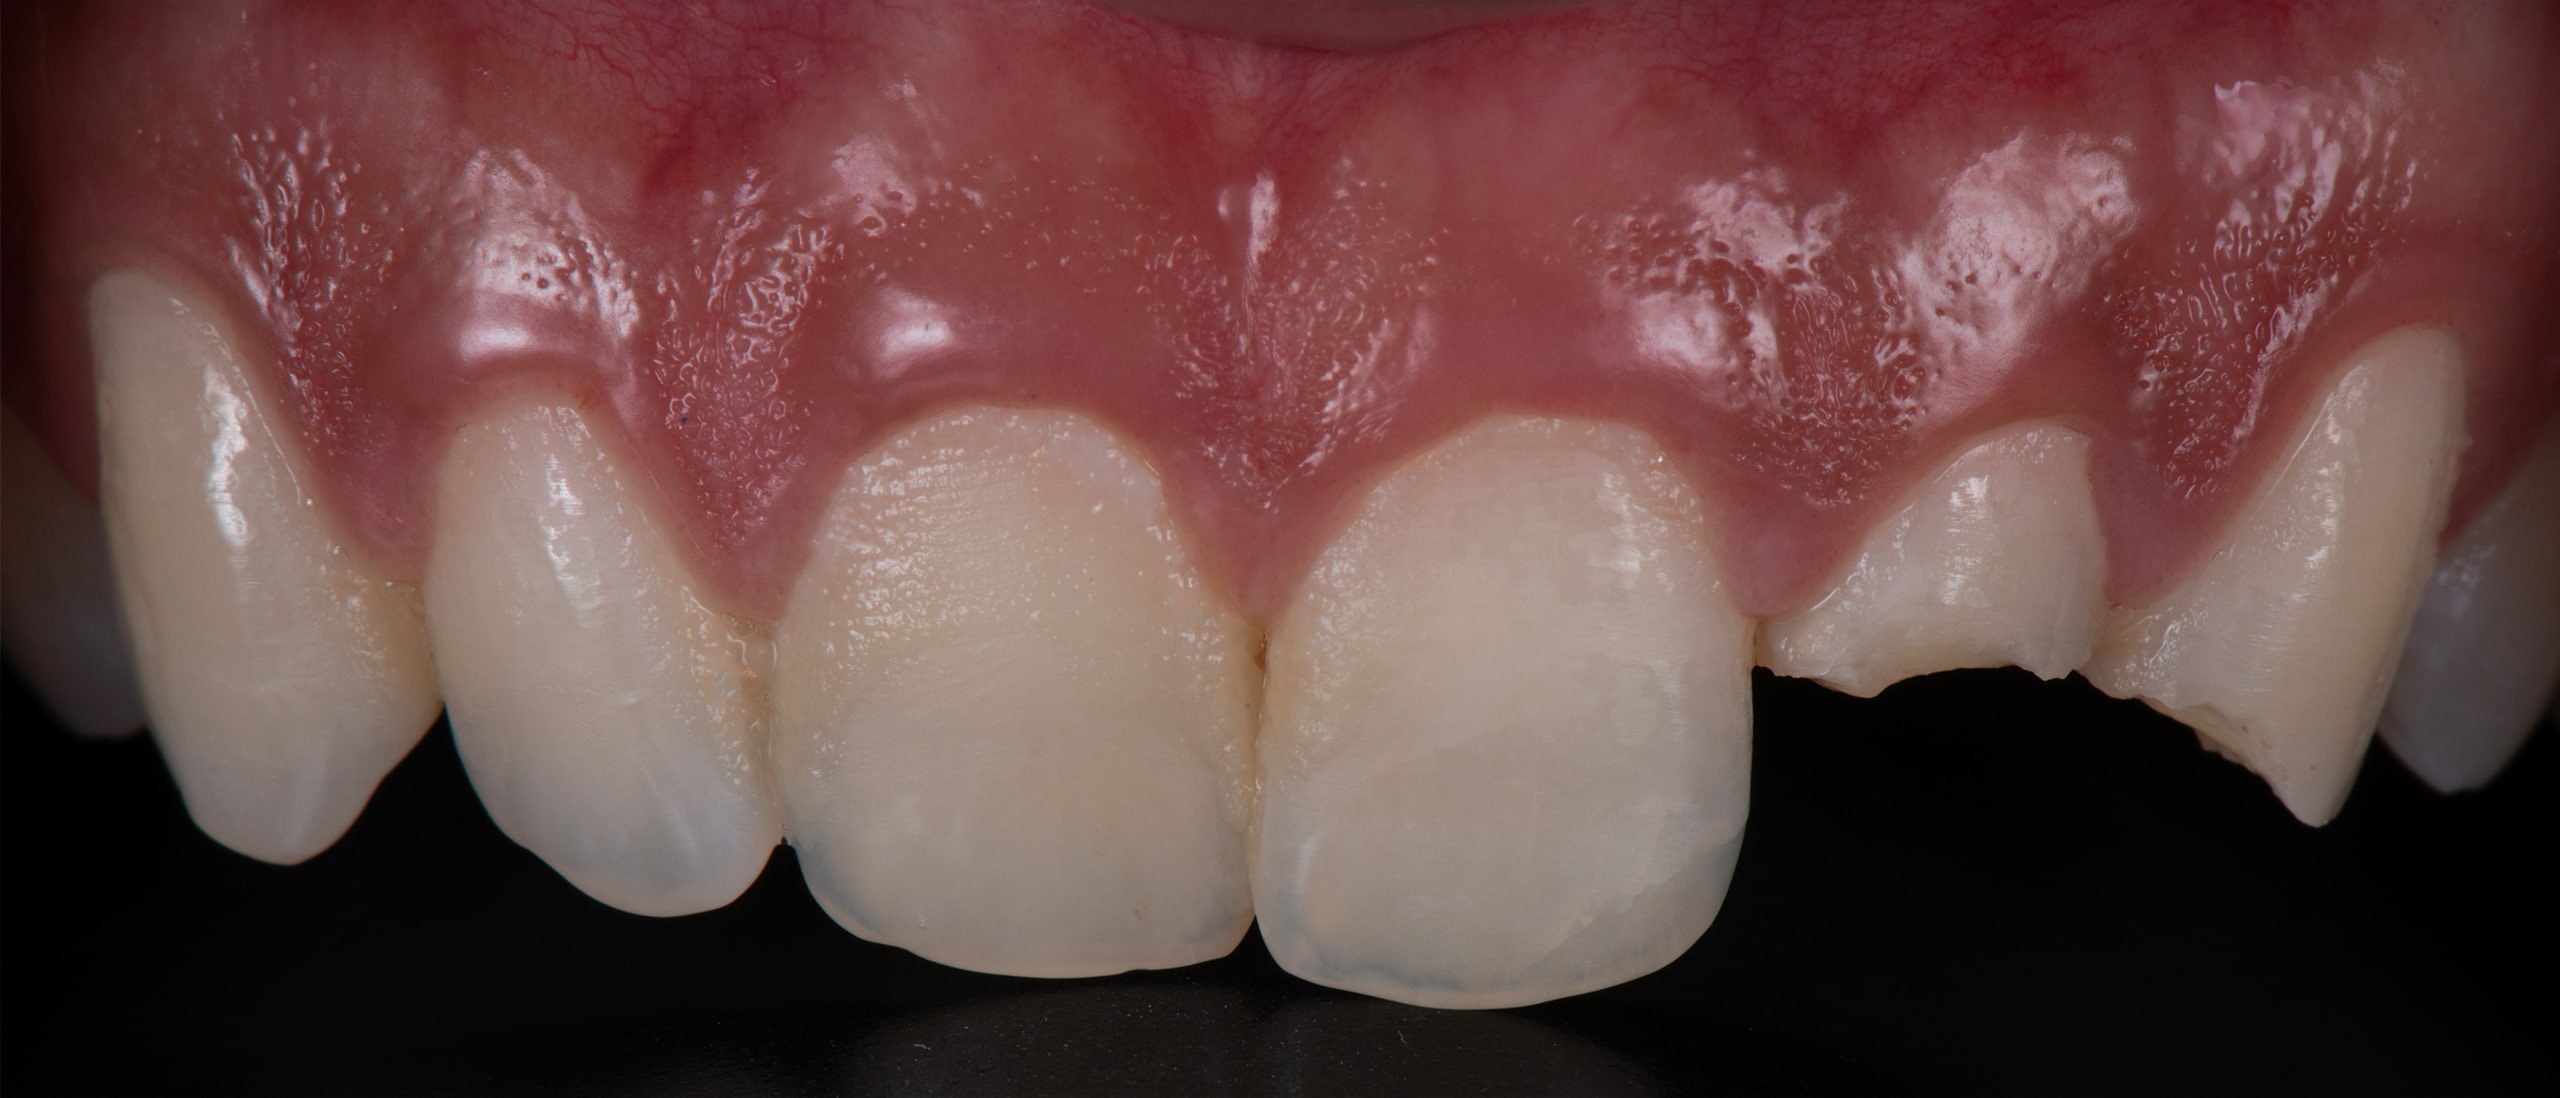 Patient's teeth after conservative dentistry treatment.